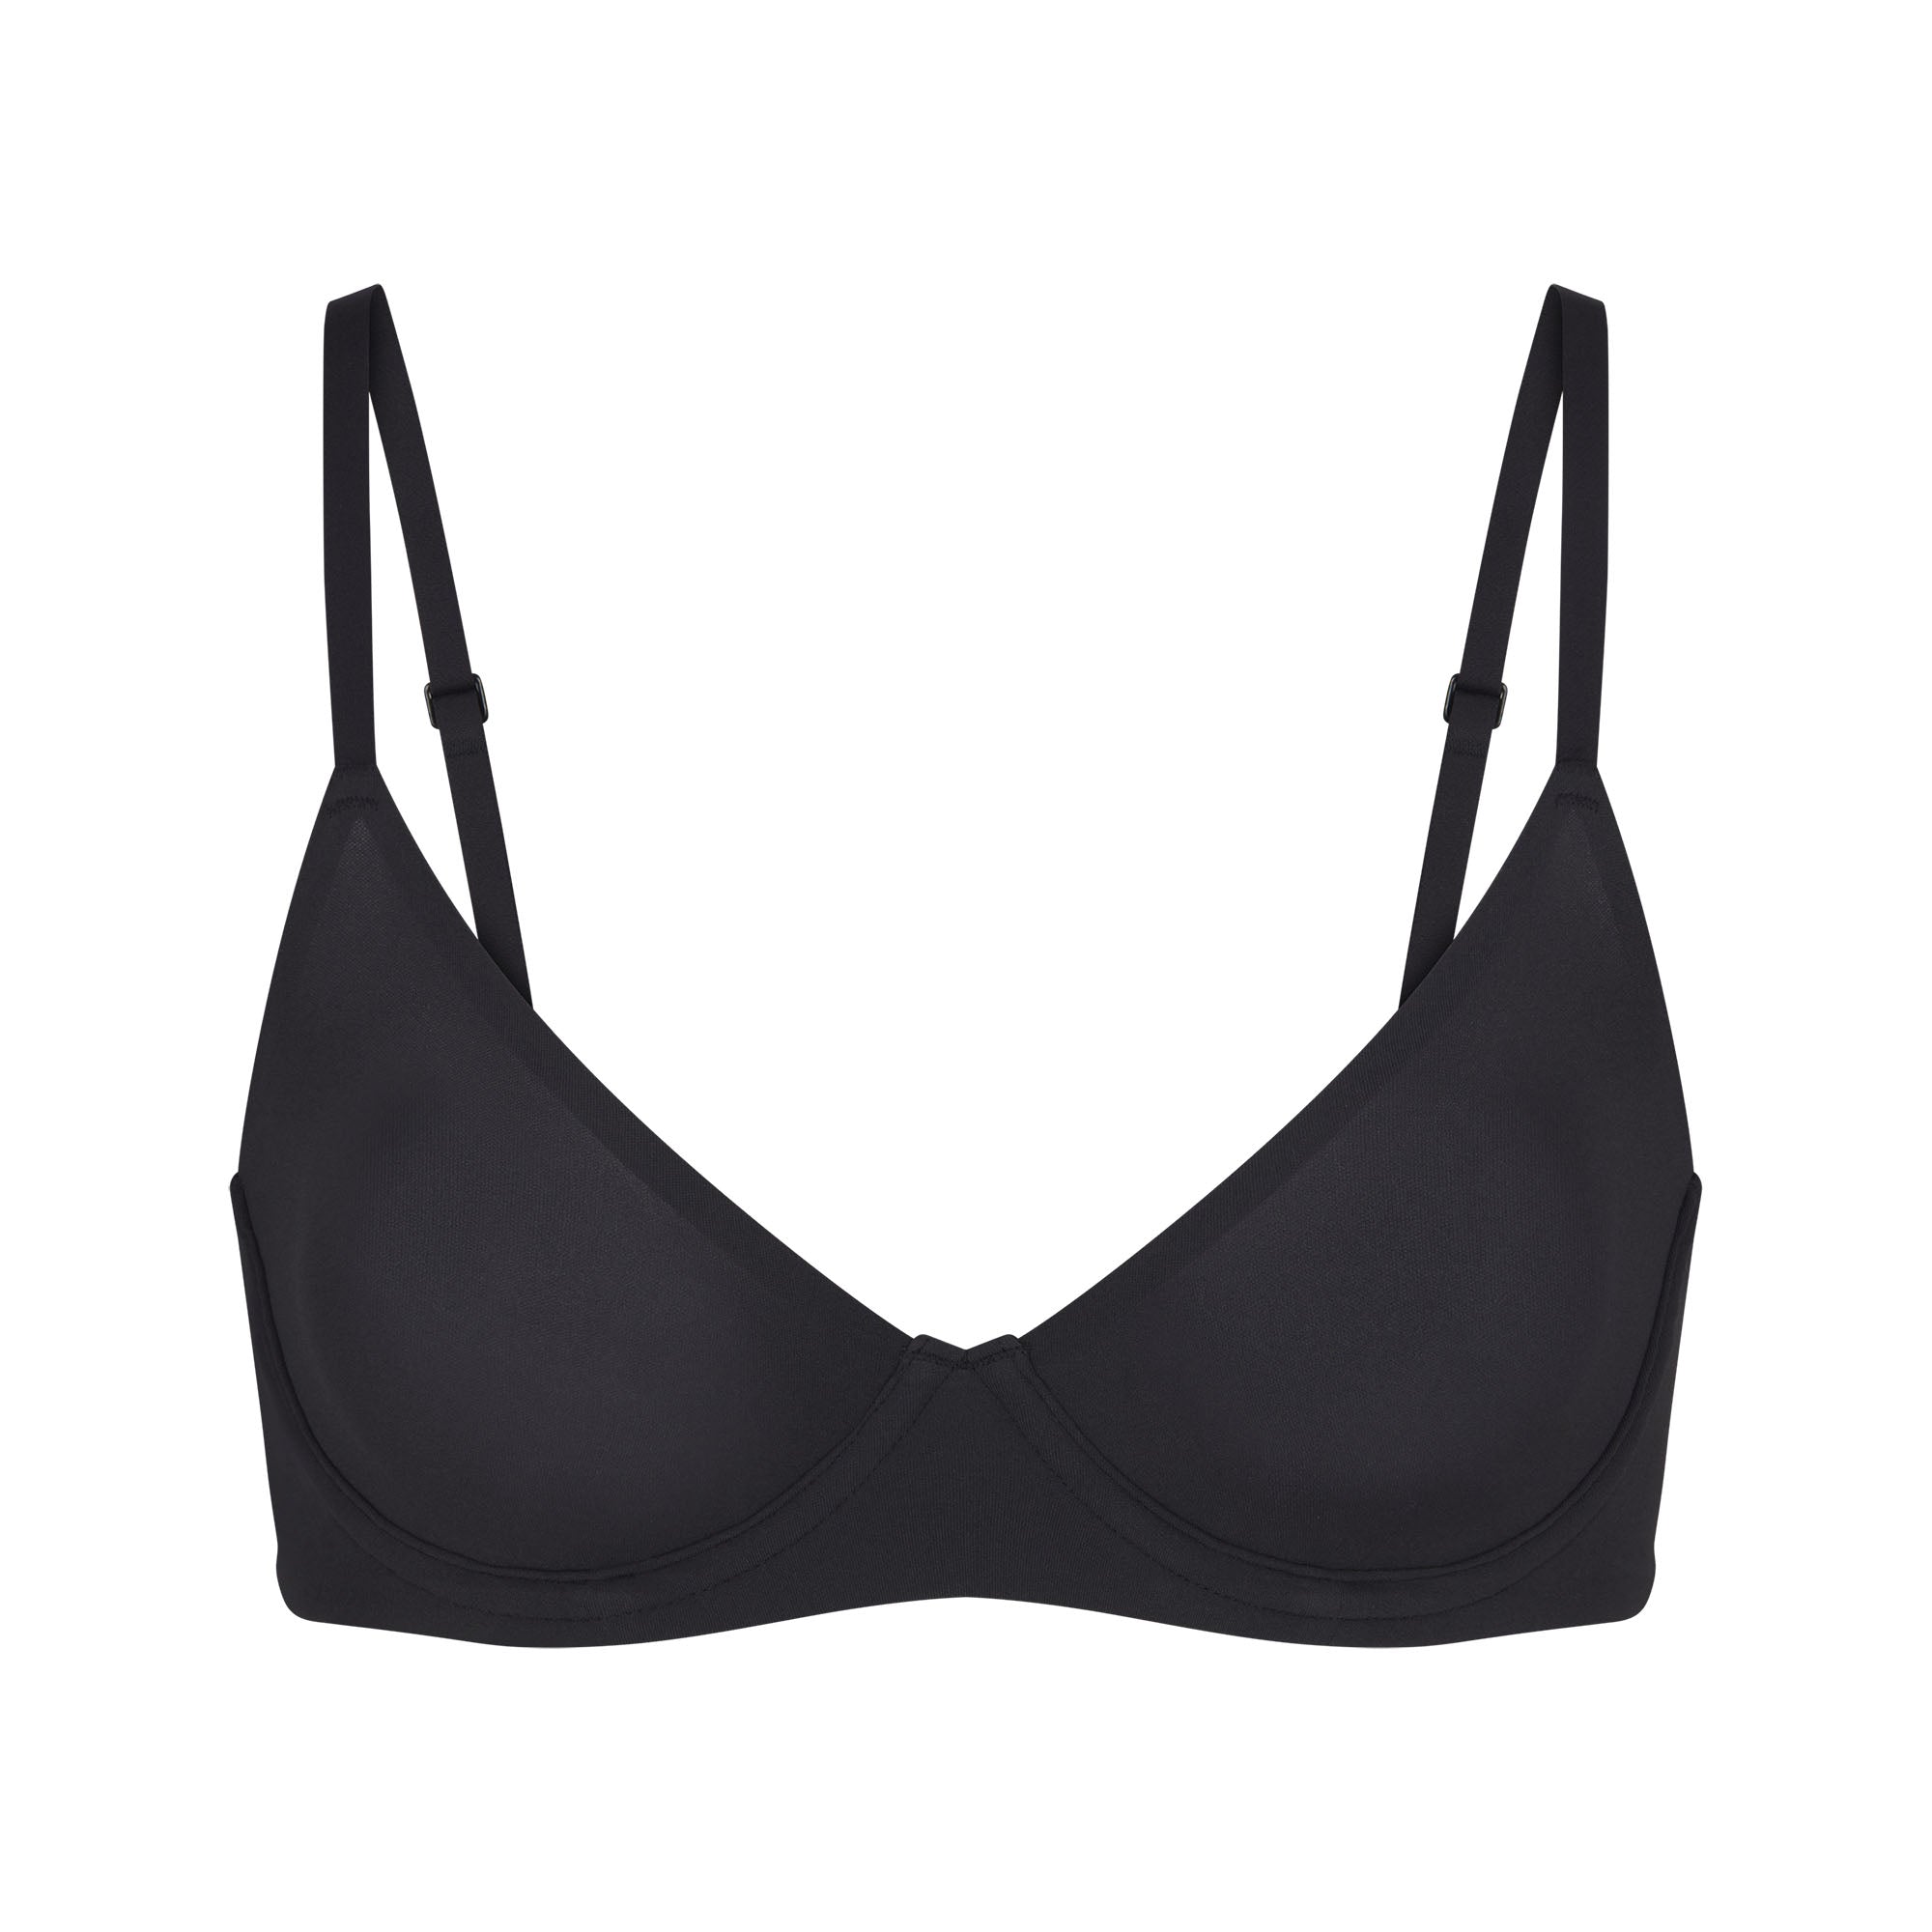 SKIMS drops Smoothing Intimates collection featuring bras and